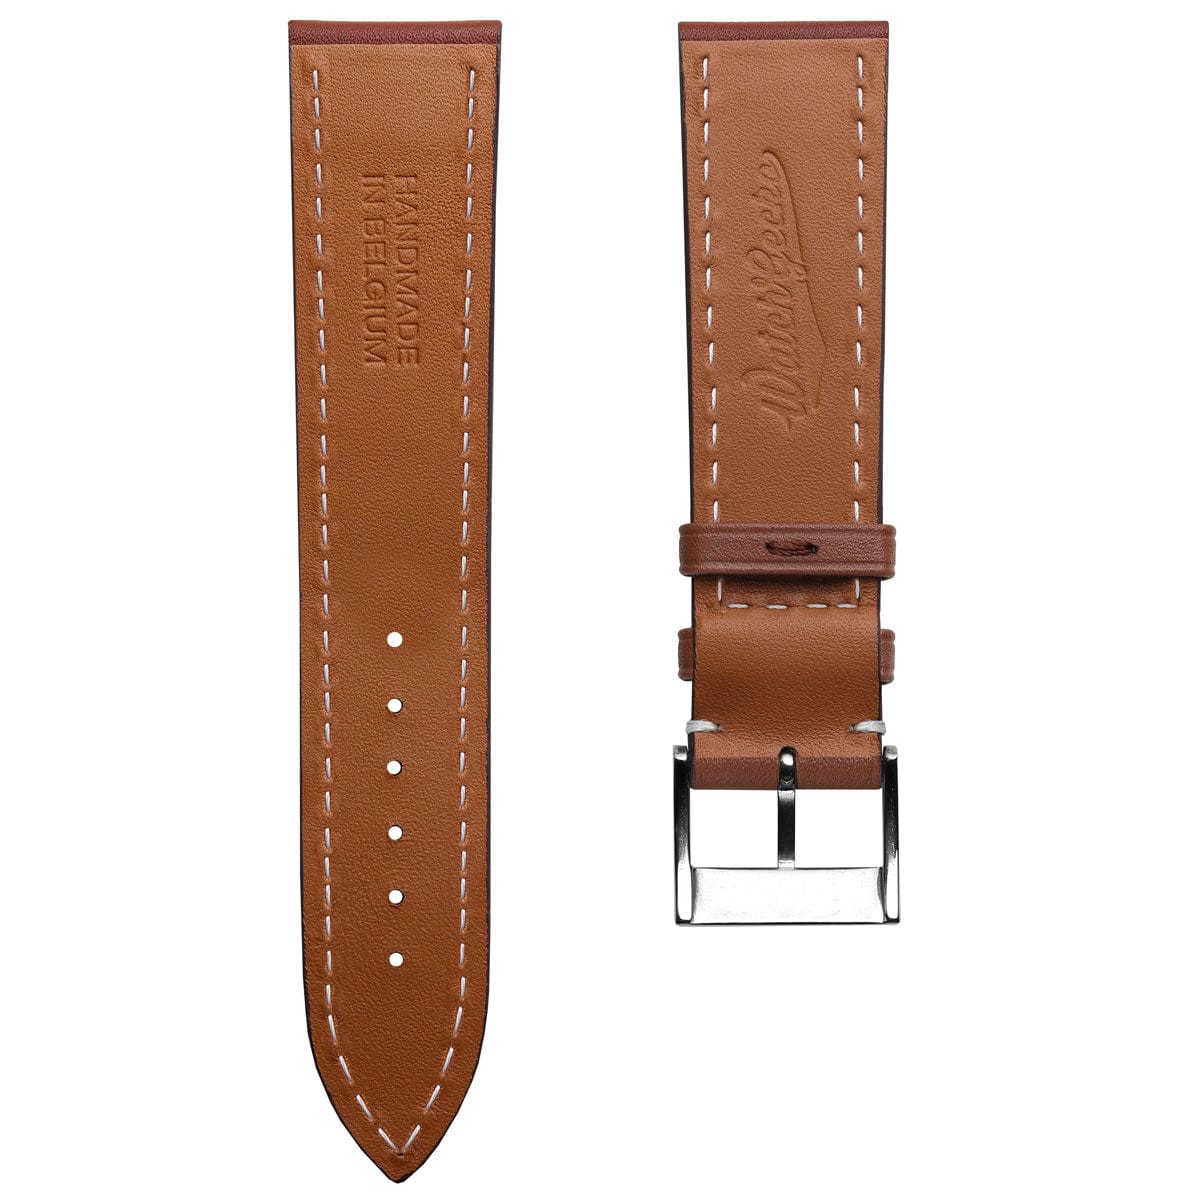 Ostend Thick Padded Leather Watch Strap - Baranil Cognac